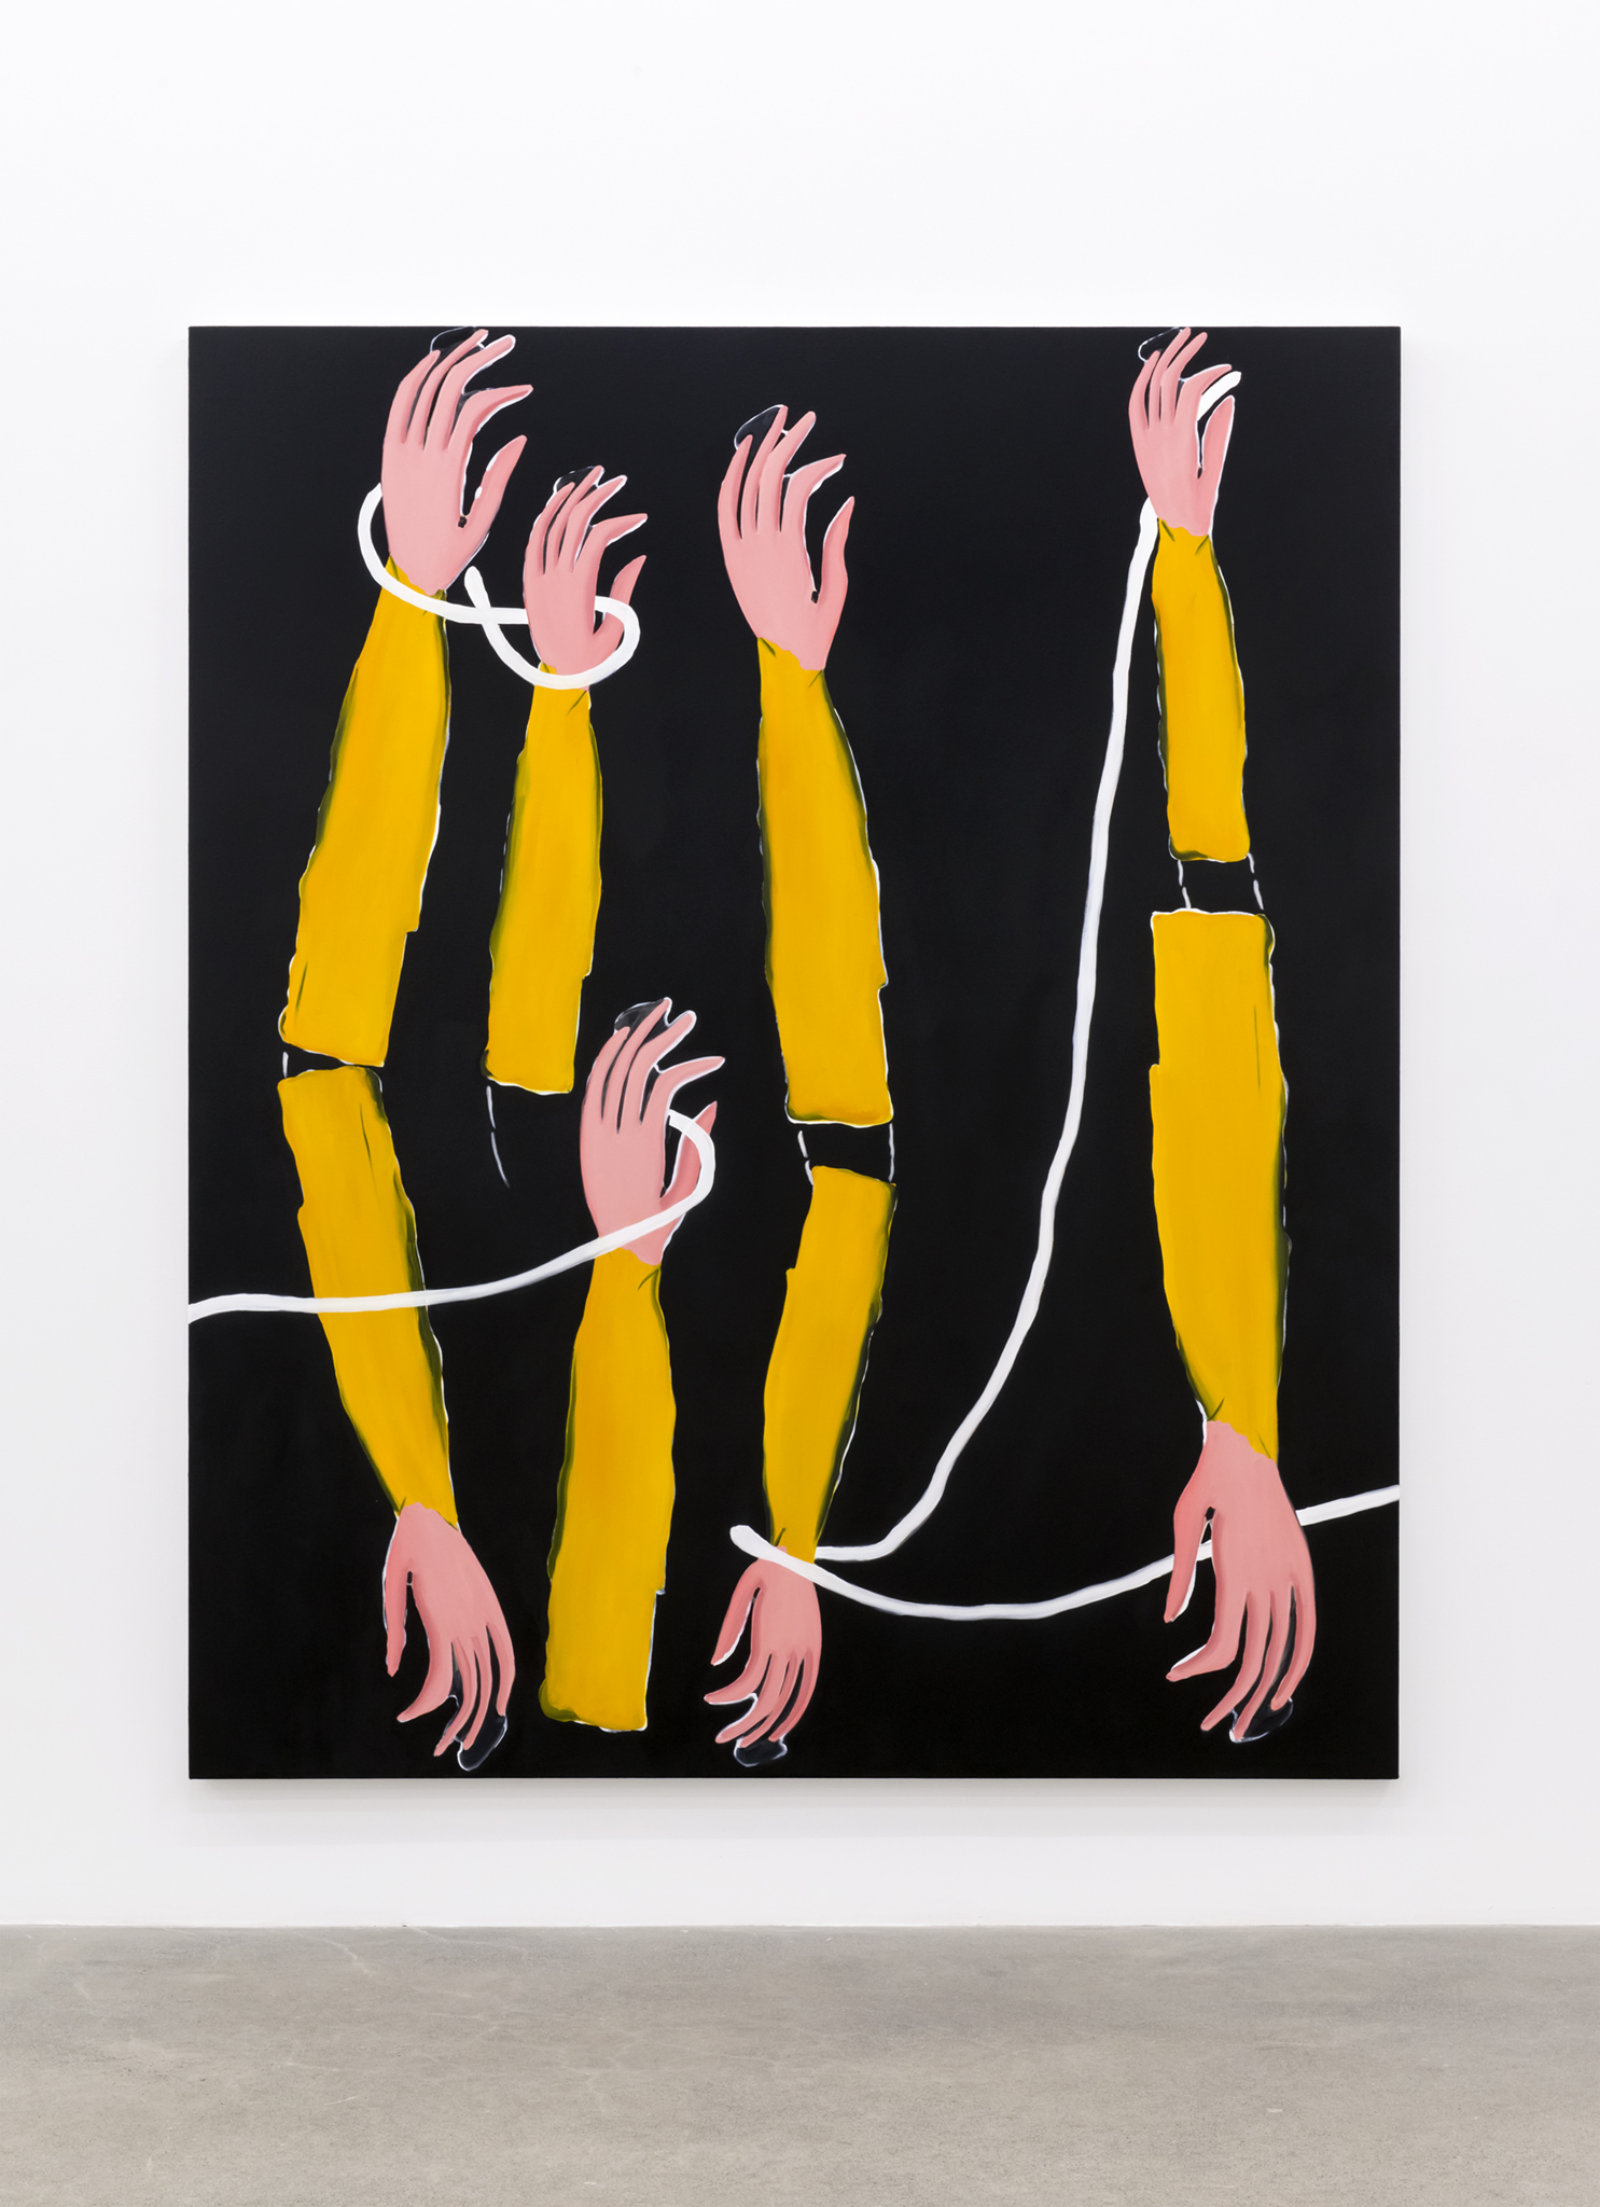 Elizabeth McIntosh, Out Hands Black, 2017, flashe and oil on canvas, 86 x 71 in. (217 x 181 cm)   